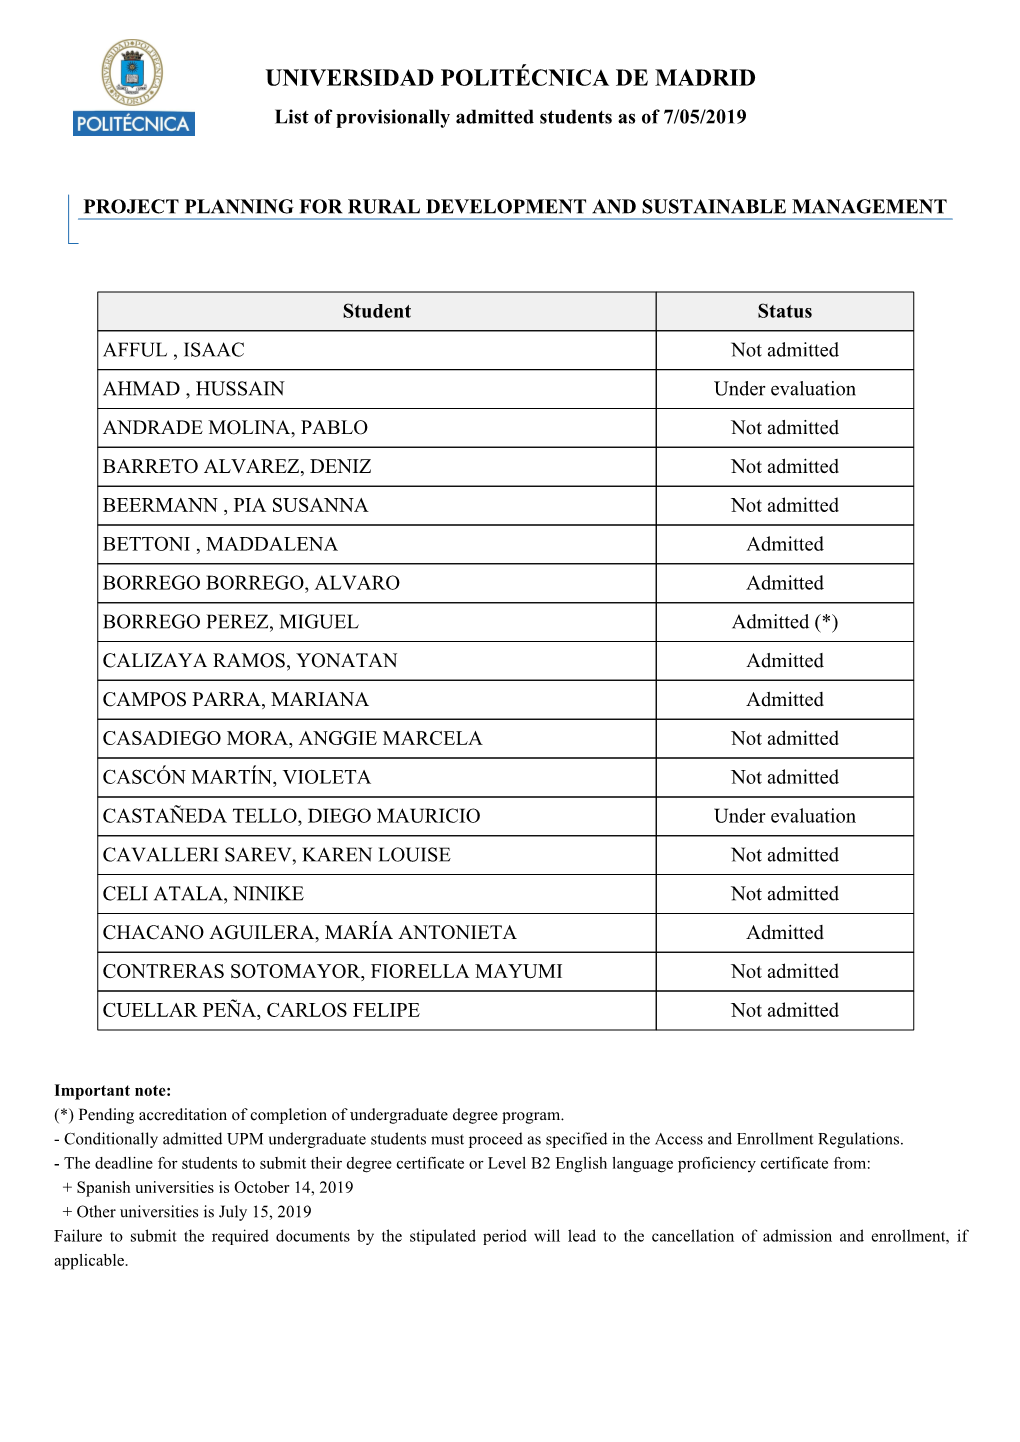 UNIVERSIDAD POLITÉCNICA DE MADRID List of Provisionally Admitted Students As of 7/05/2019